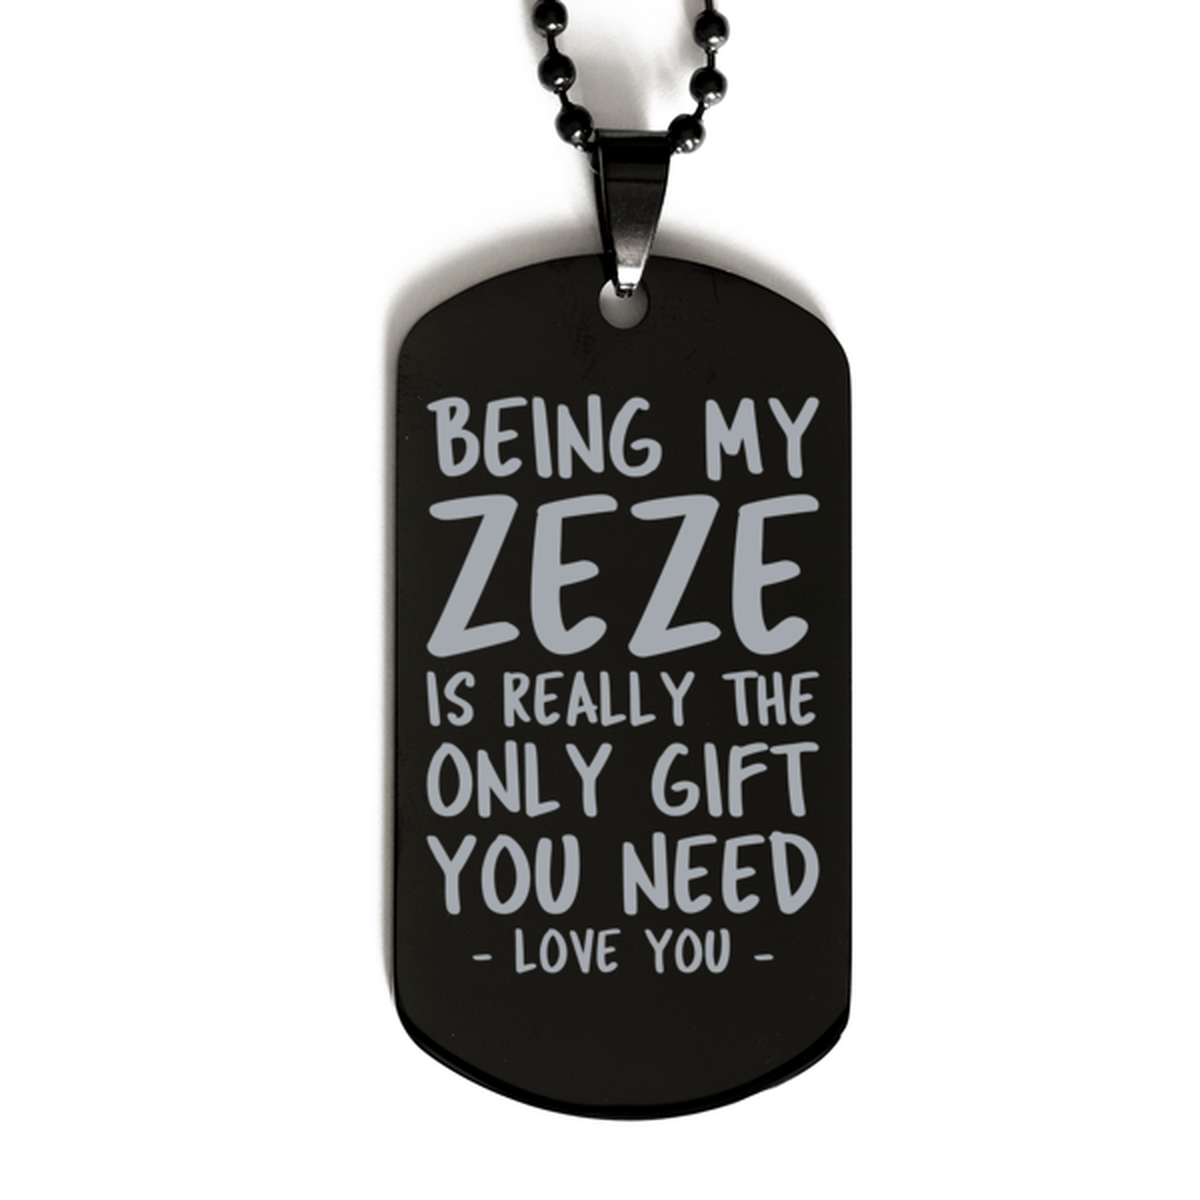 Funny Zeze Black Dog Tag Necklace, Being My Zeze Is Really the Only Gift You Need, Best Birthday Gifts for Zeze